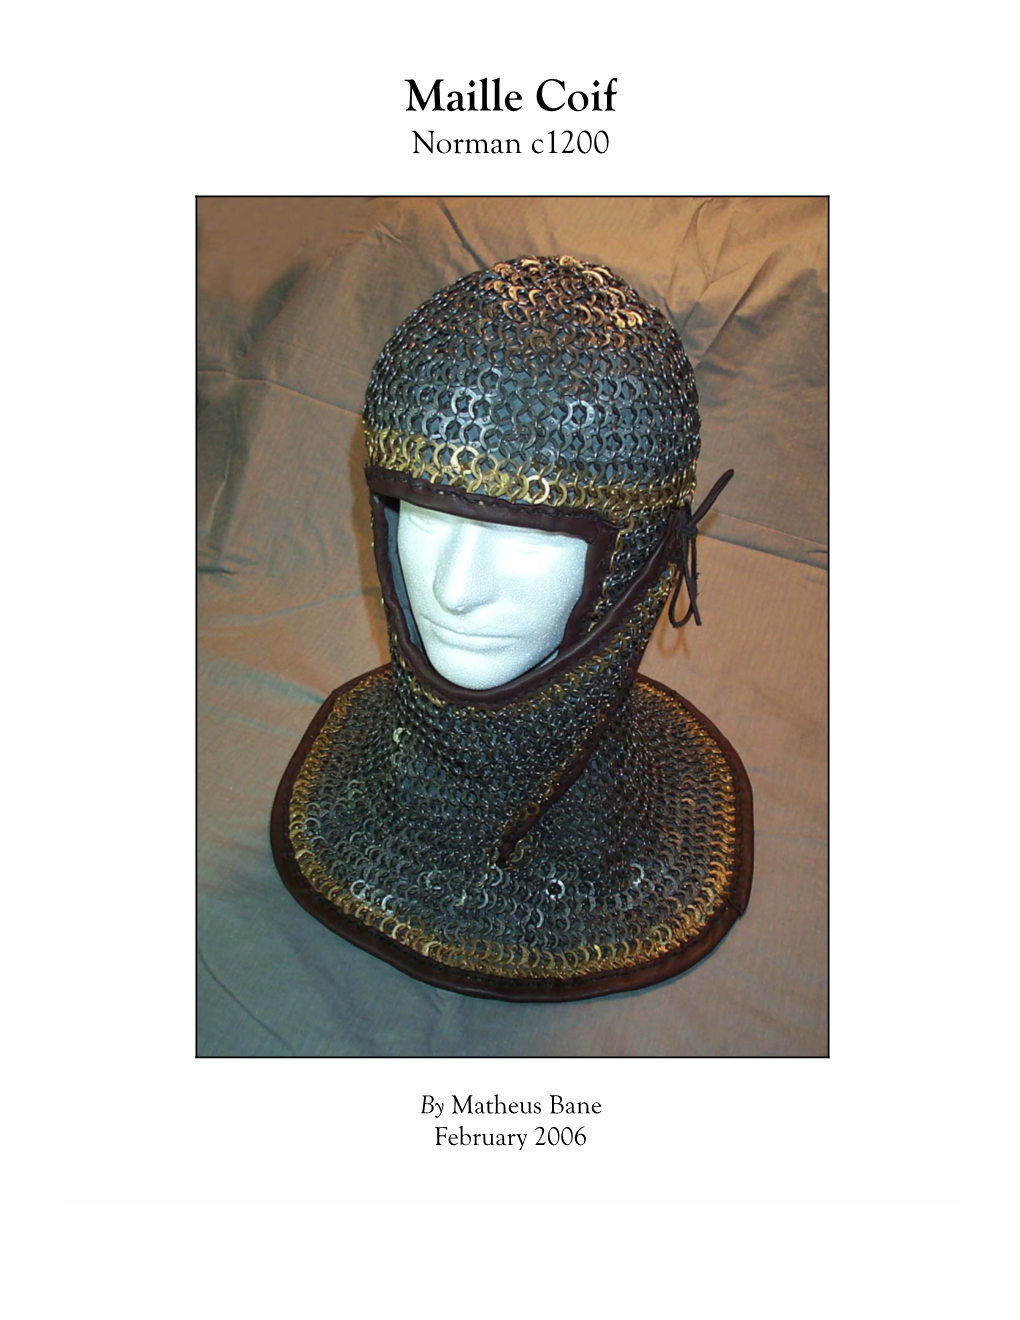 Maille Coif Norman C1200